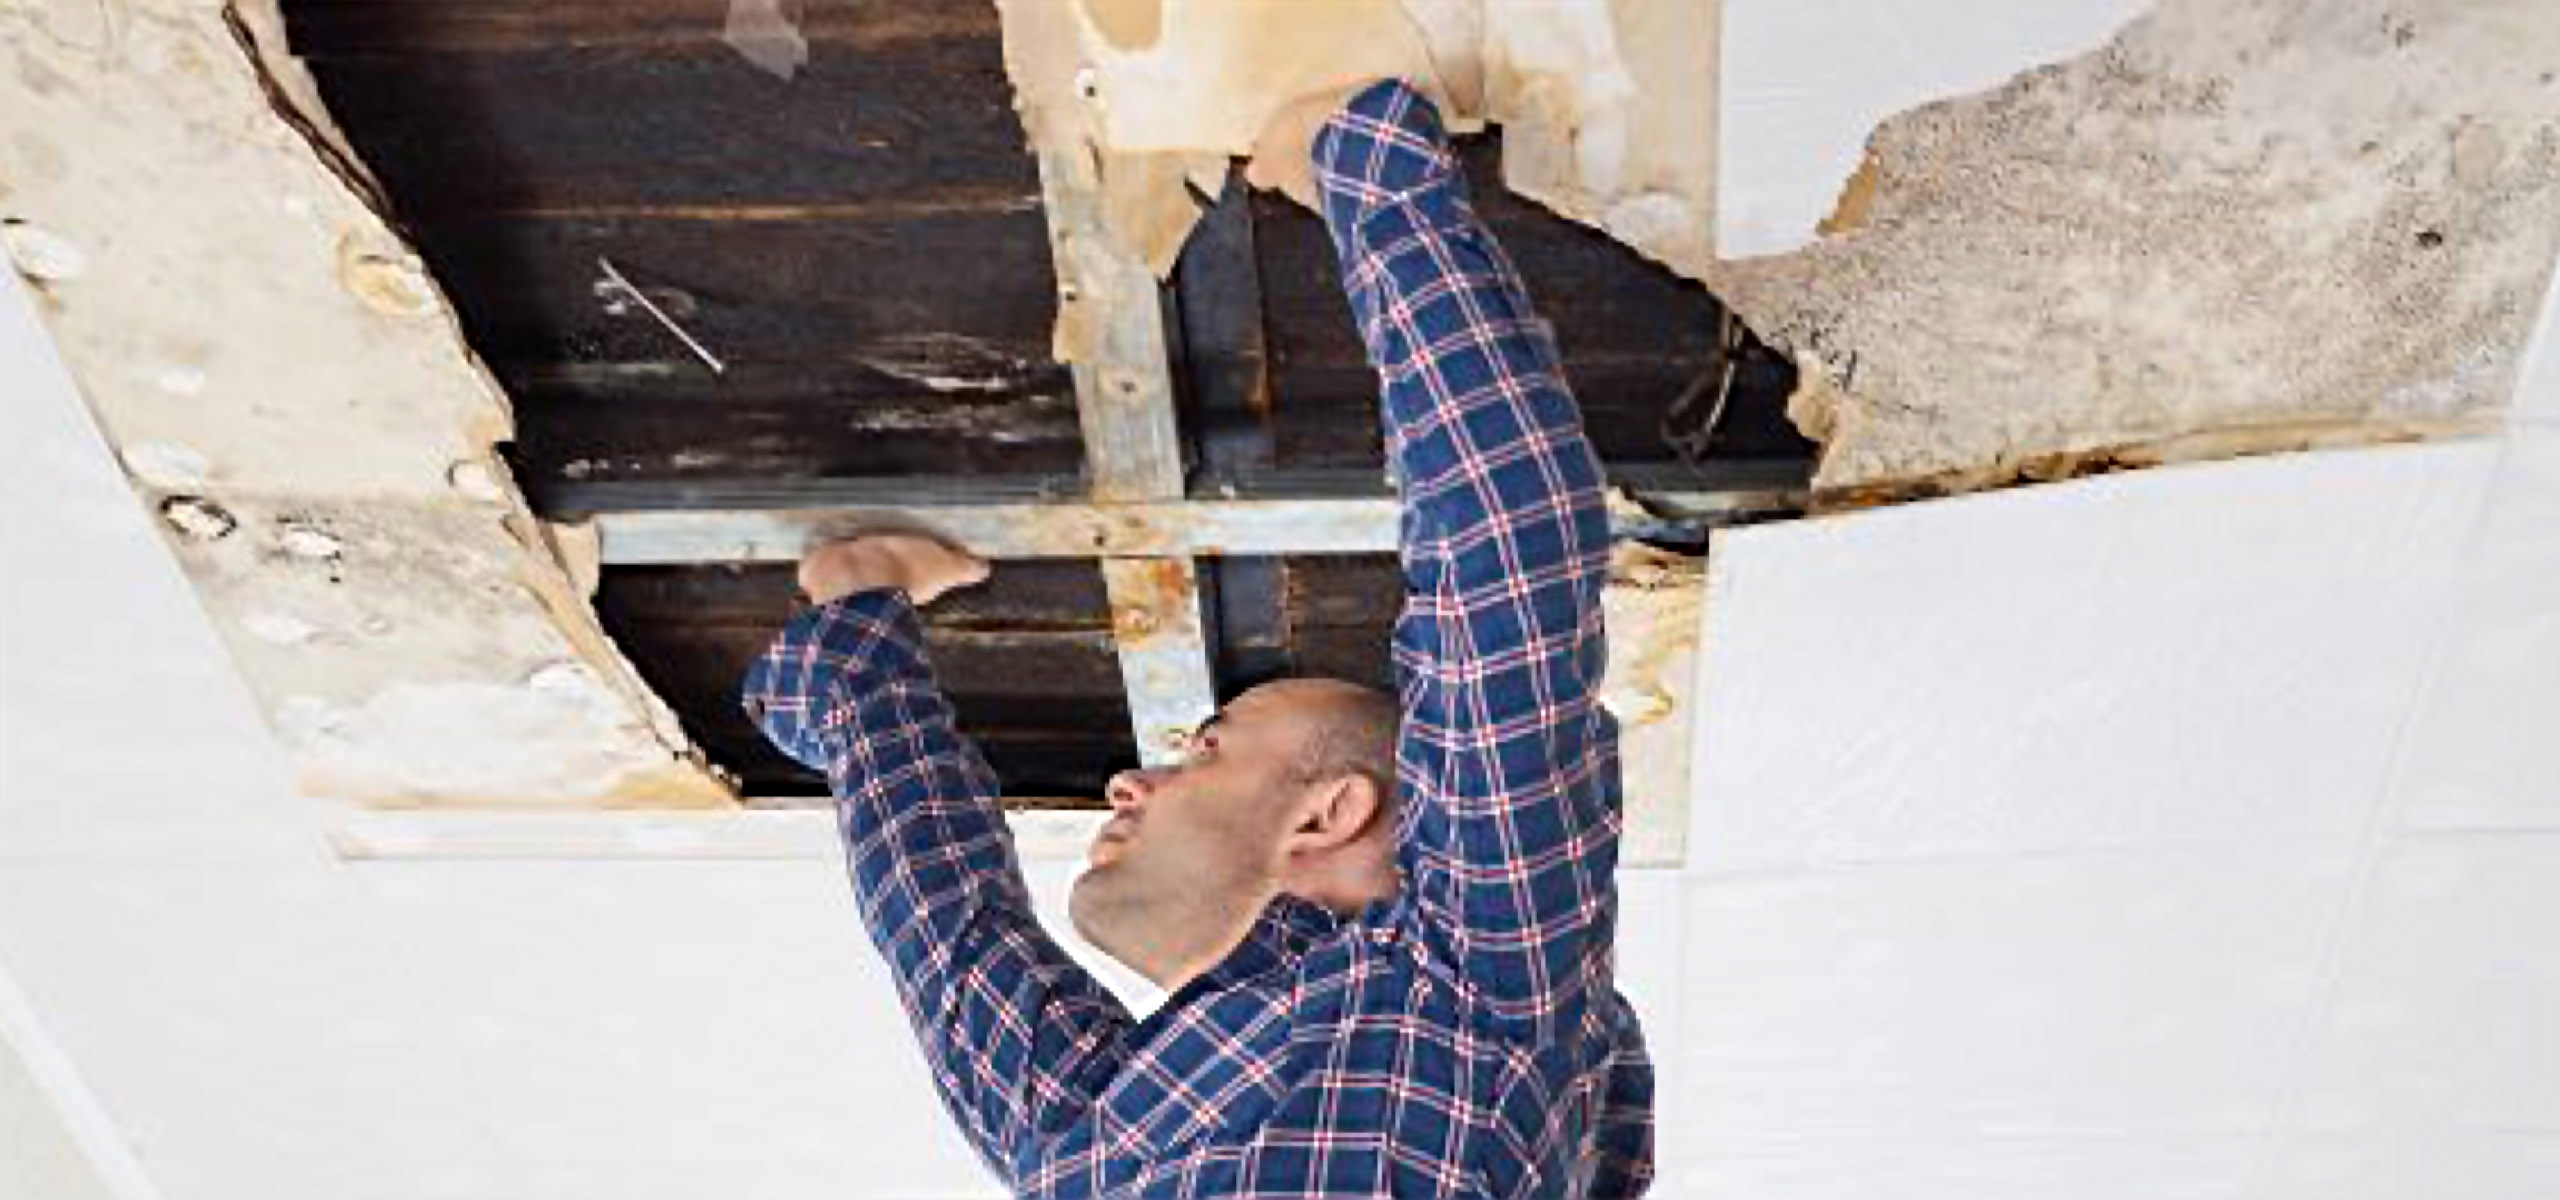 technician inspecting ceiling with water damage